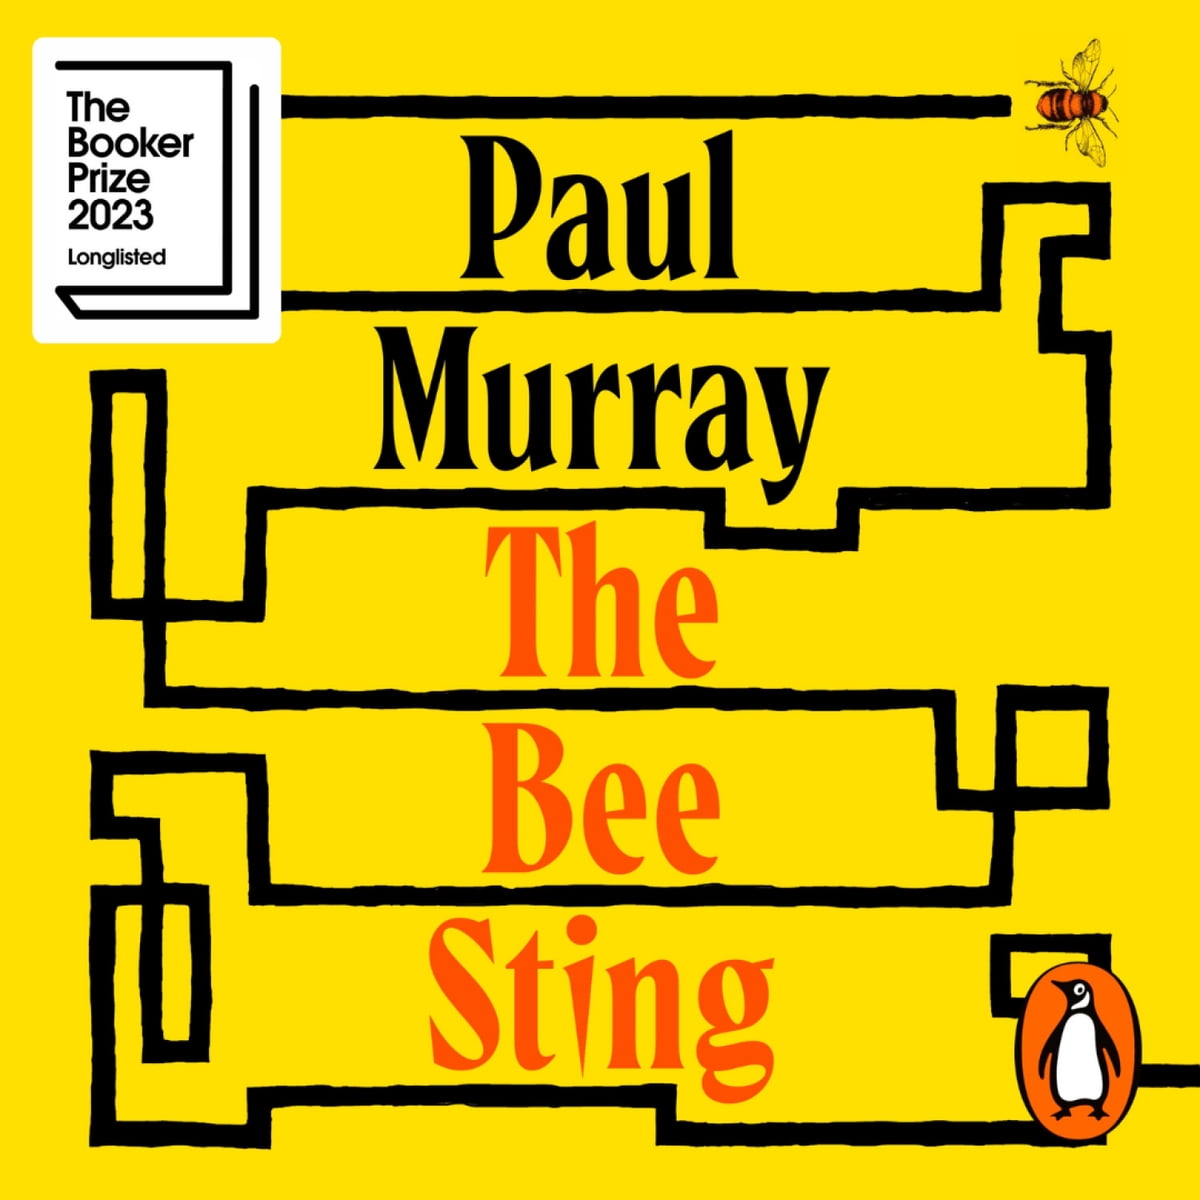 Paul Murray: Bee Sting (2023, Penguin Books, Limited)